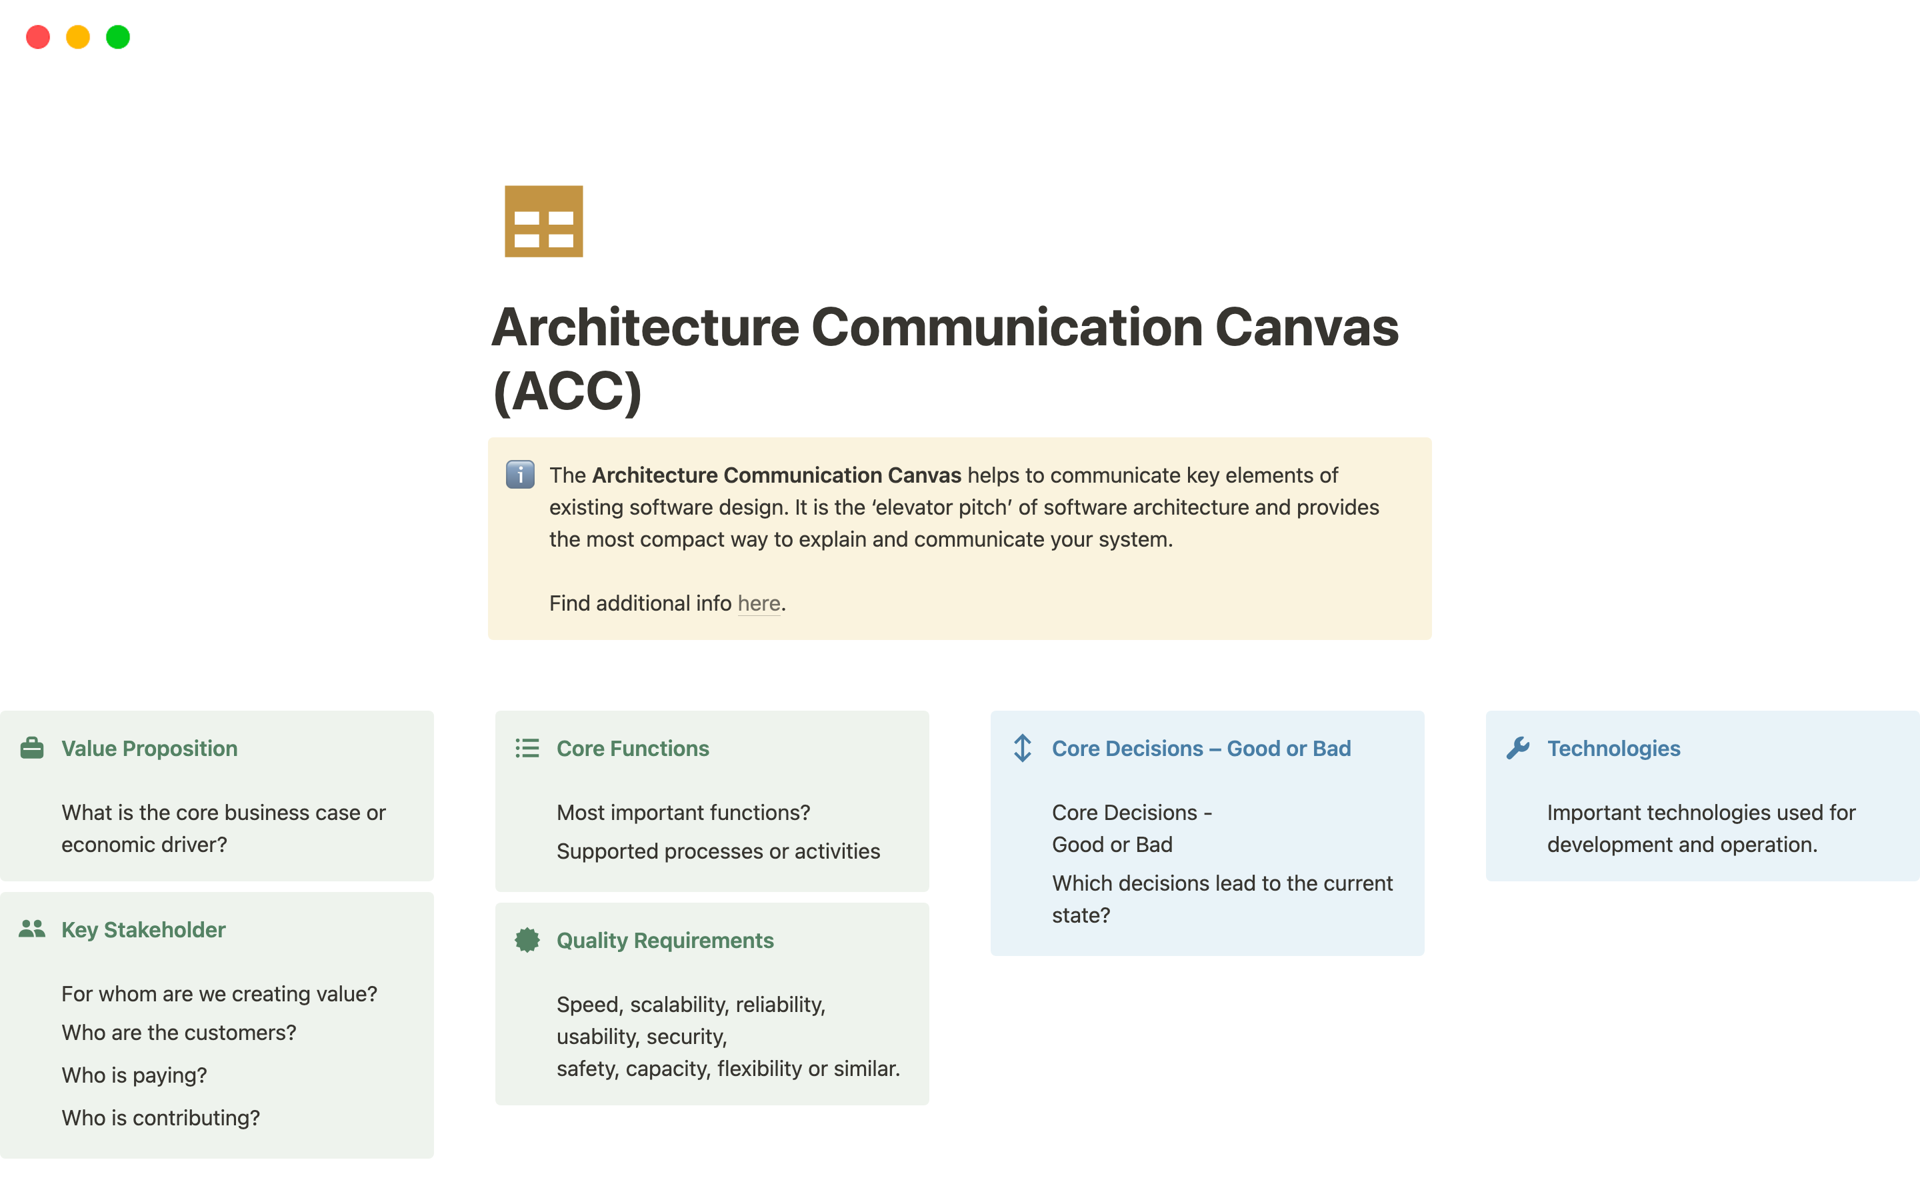 The Architecture Communication Canvas helps to communicate key elements of existing software design. It is the ‘elevator pitch’ of software architecture and provides the most compact way to explain and communicate your system.